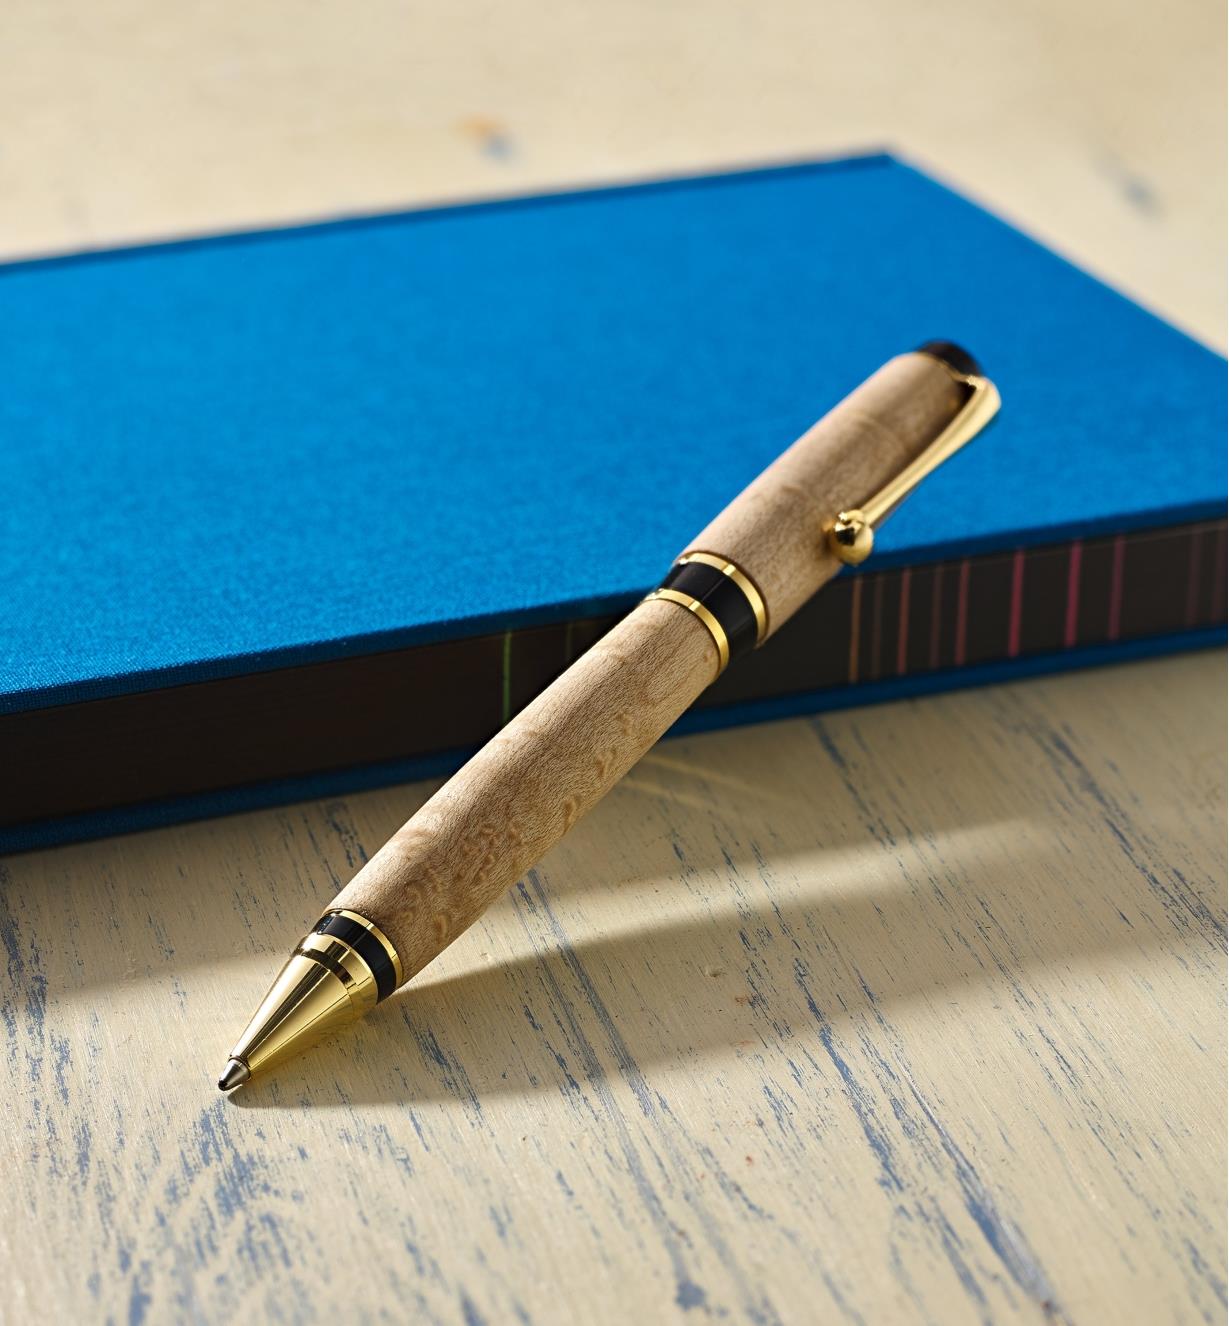 Example of an Olmsted gold pen turned from a wood blank, propped on a notebook